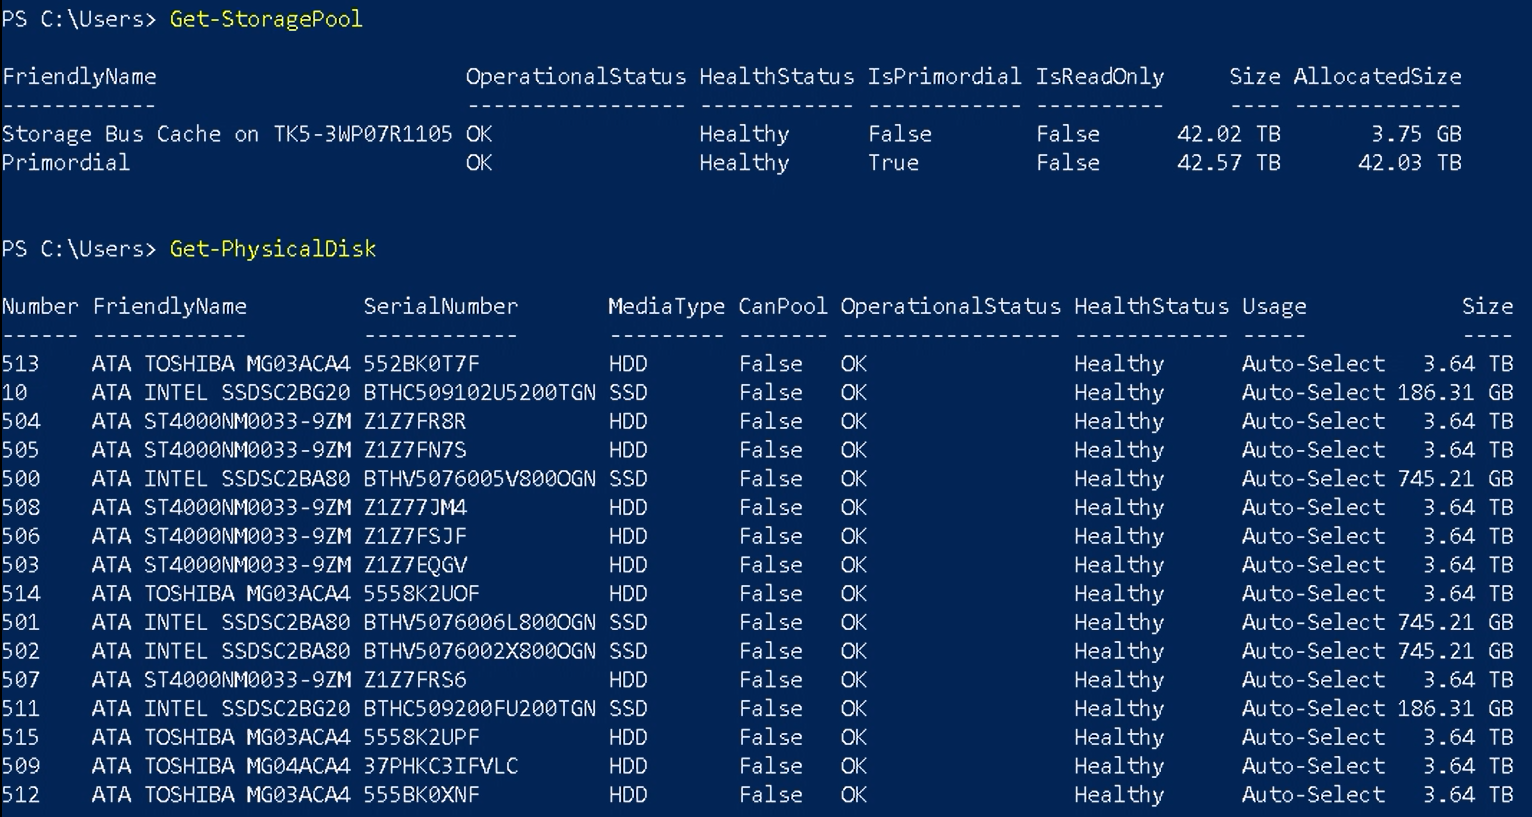 Screenshot showing the results of Get-StoragePool and Get-PhysicalDisk after enabling the storage bus cache.